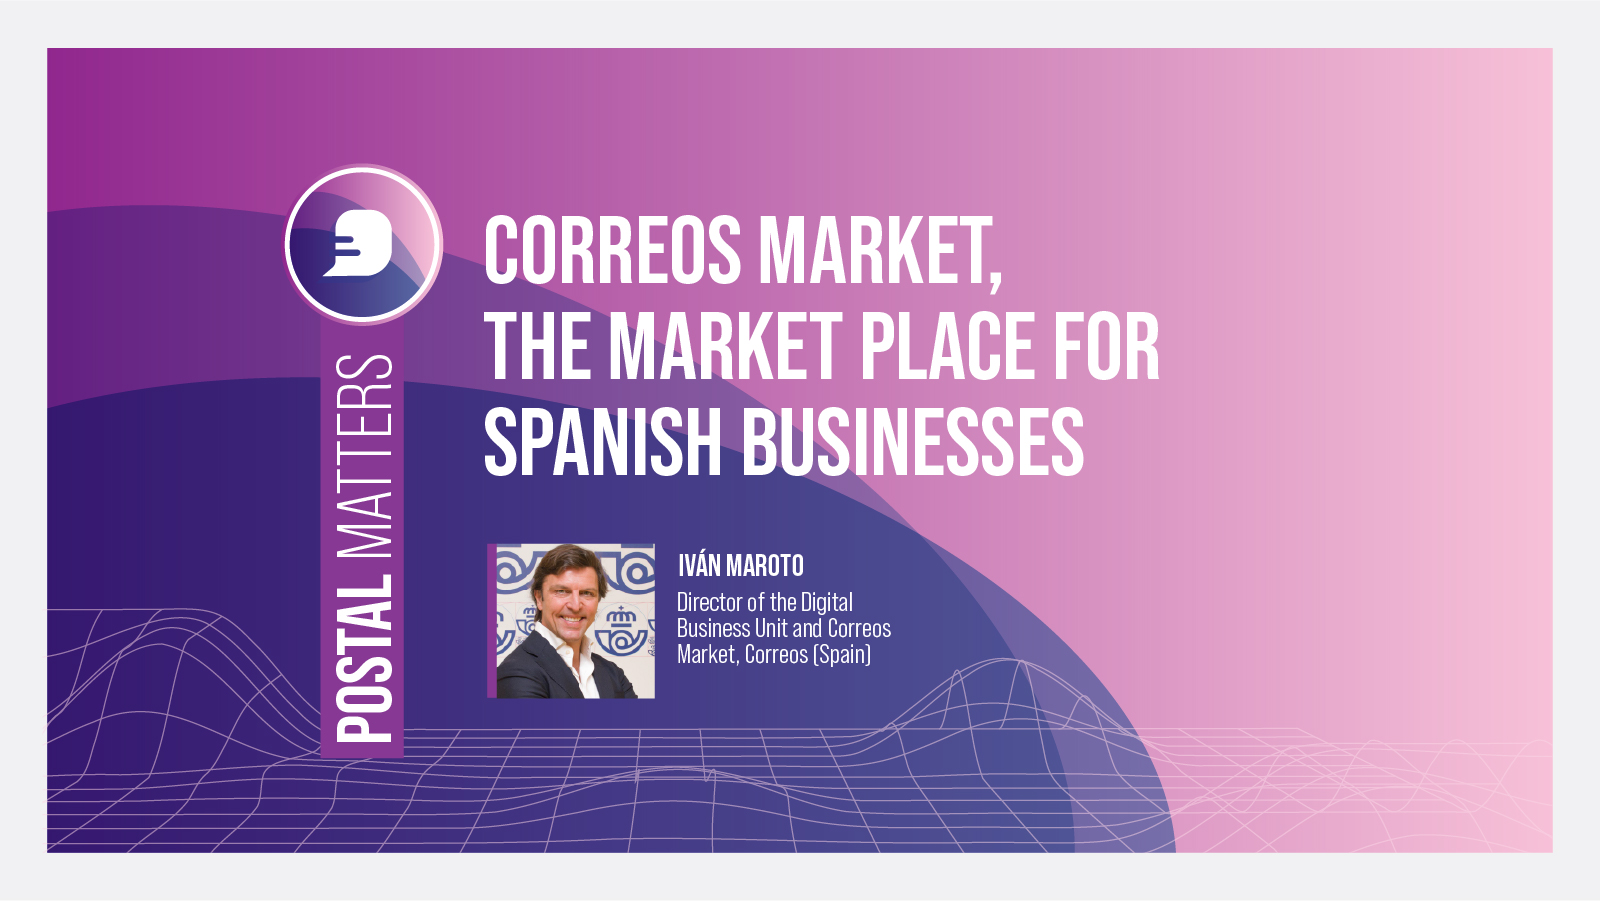 Correos Market, The market place for Spanish businesses